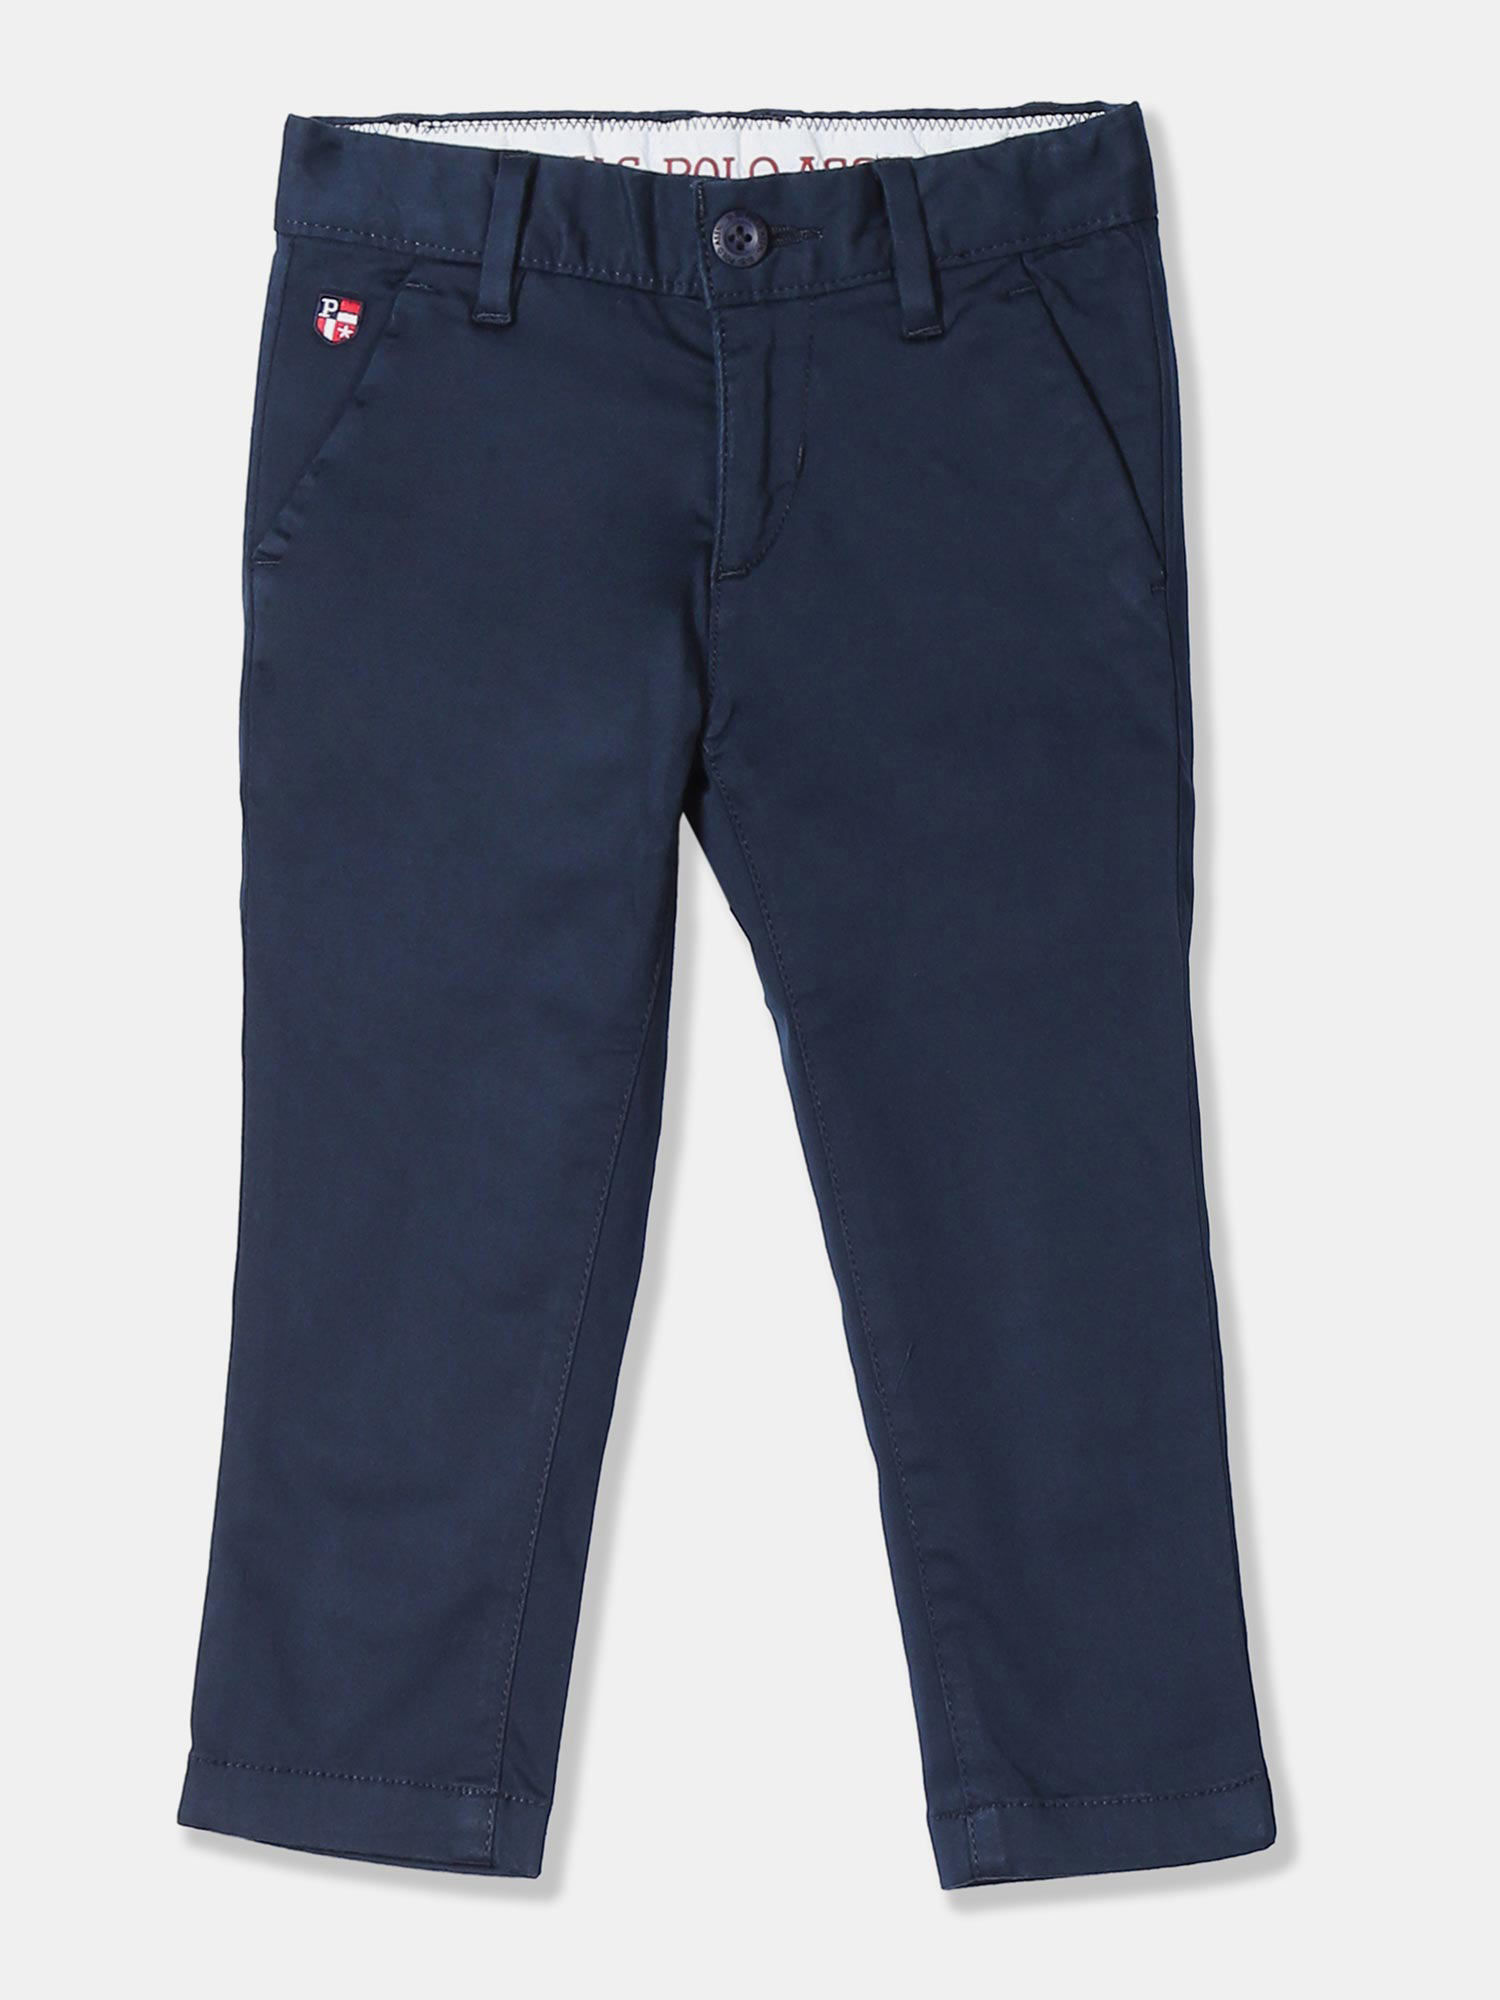 US POLO ASSN Boys Regular Fit Solid Trousers  Blue Buy US POLO ASSN  Boys Regular Fit Solid Trousers  Blue Online at Best Price in India  Nykaa